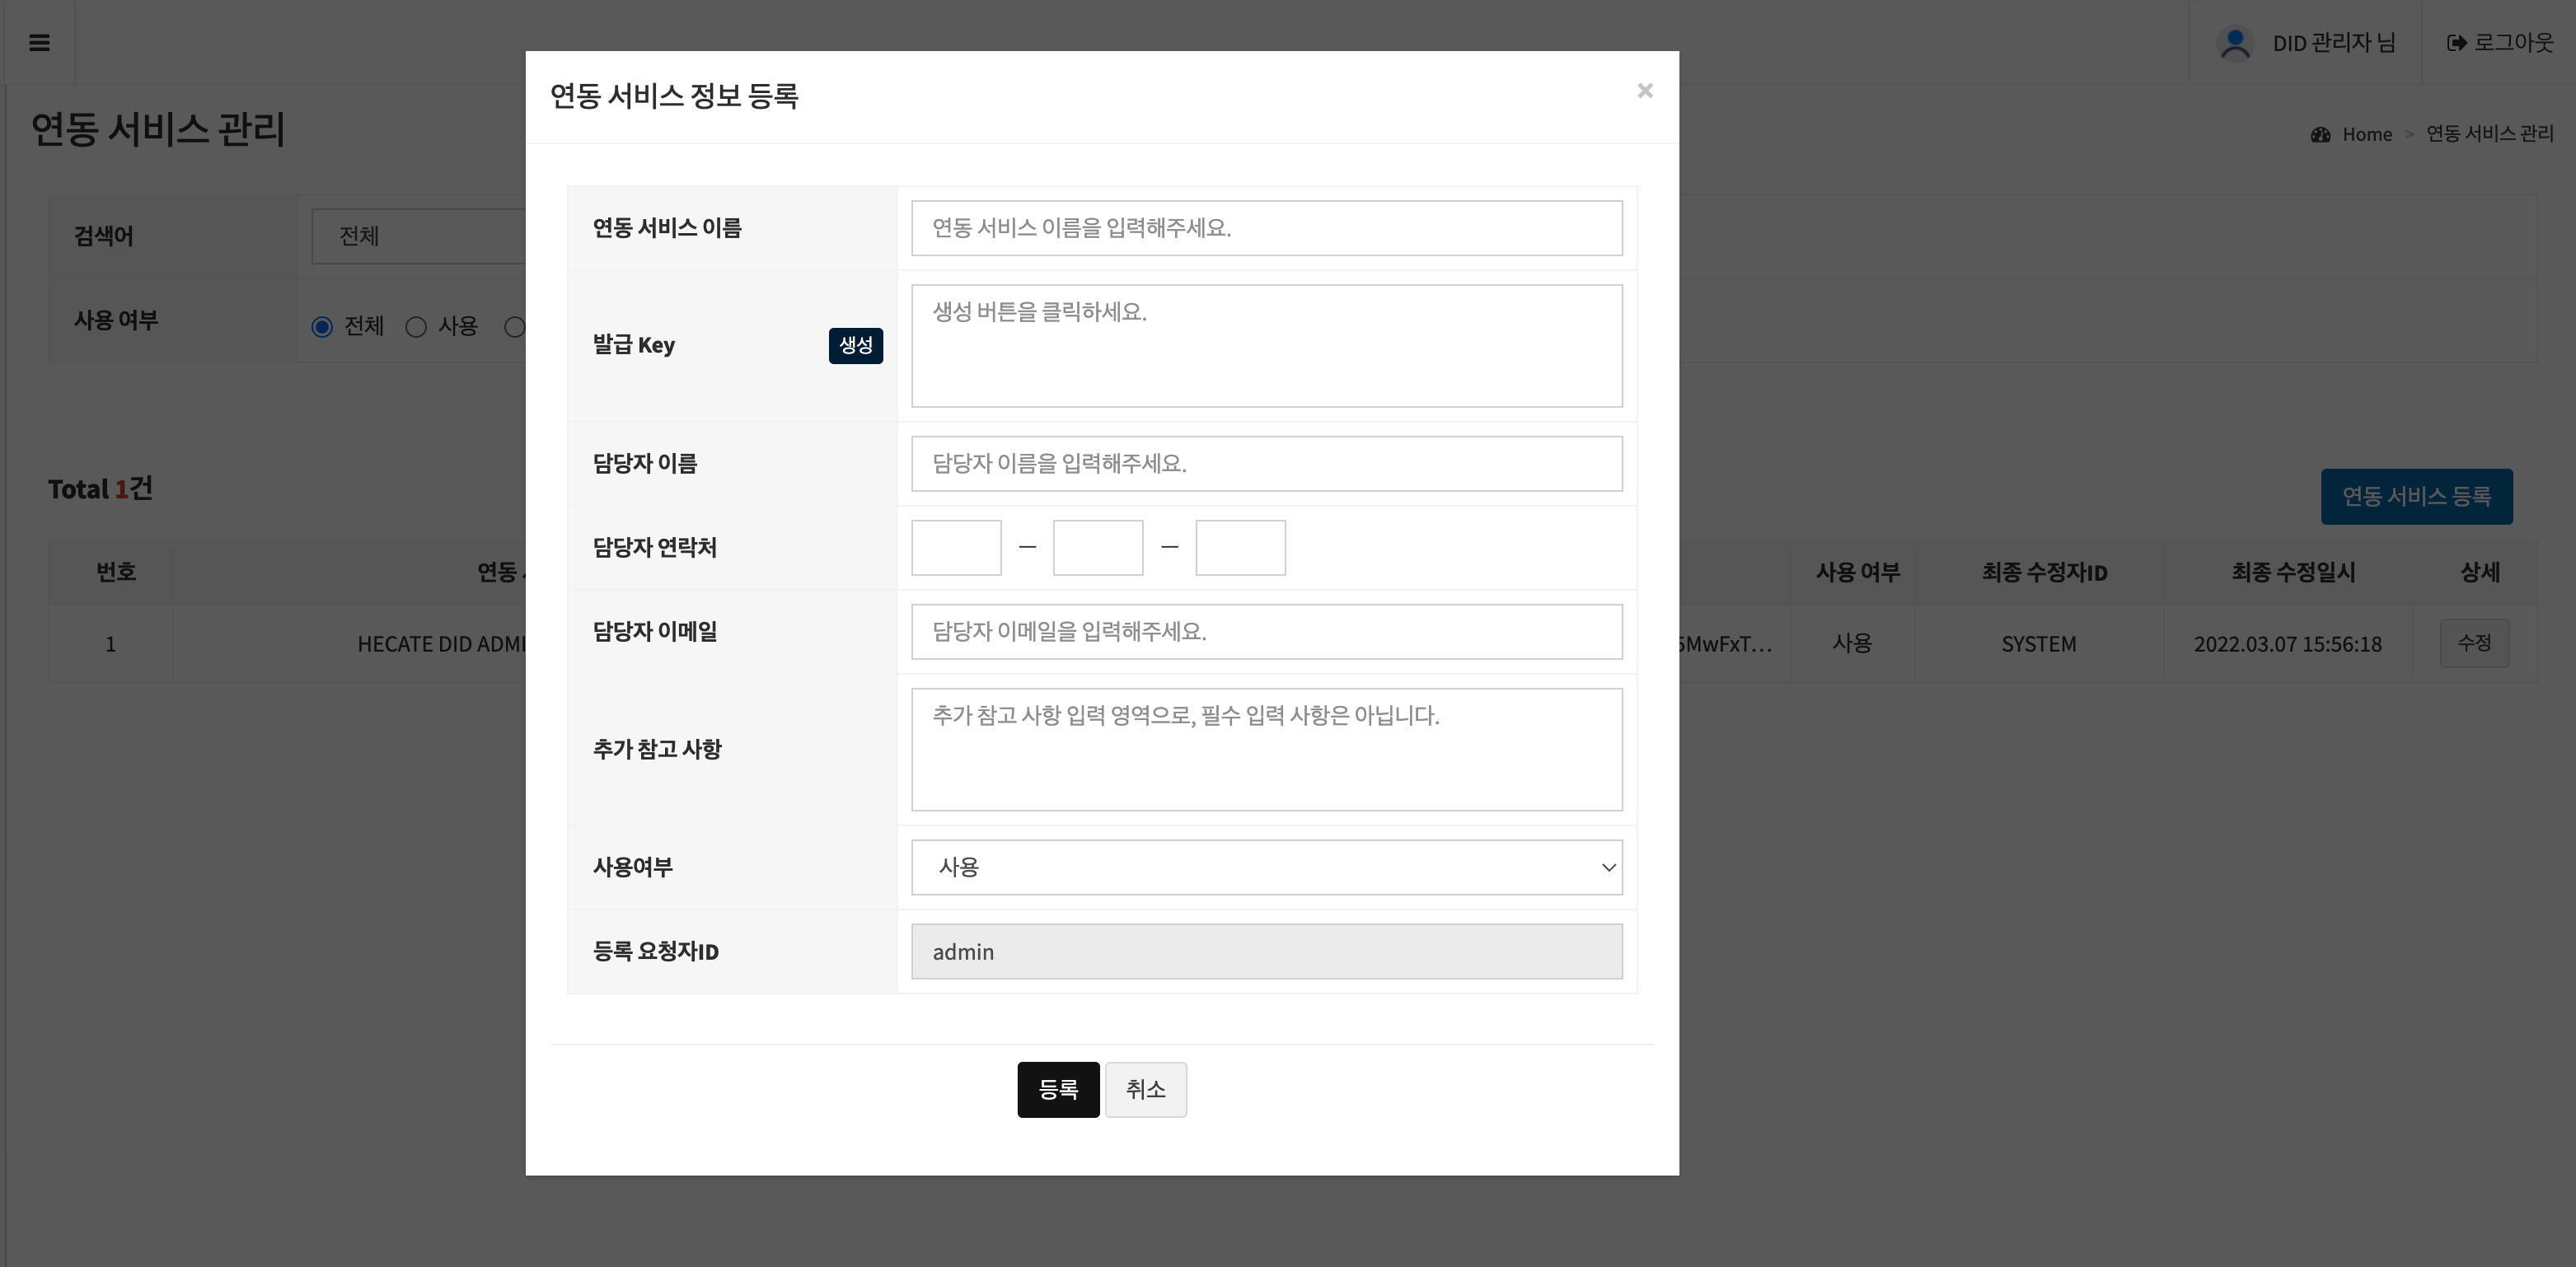 userguide_image007_설정_연동서비스관리(등록_p).png